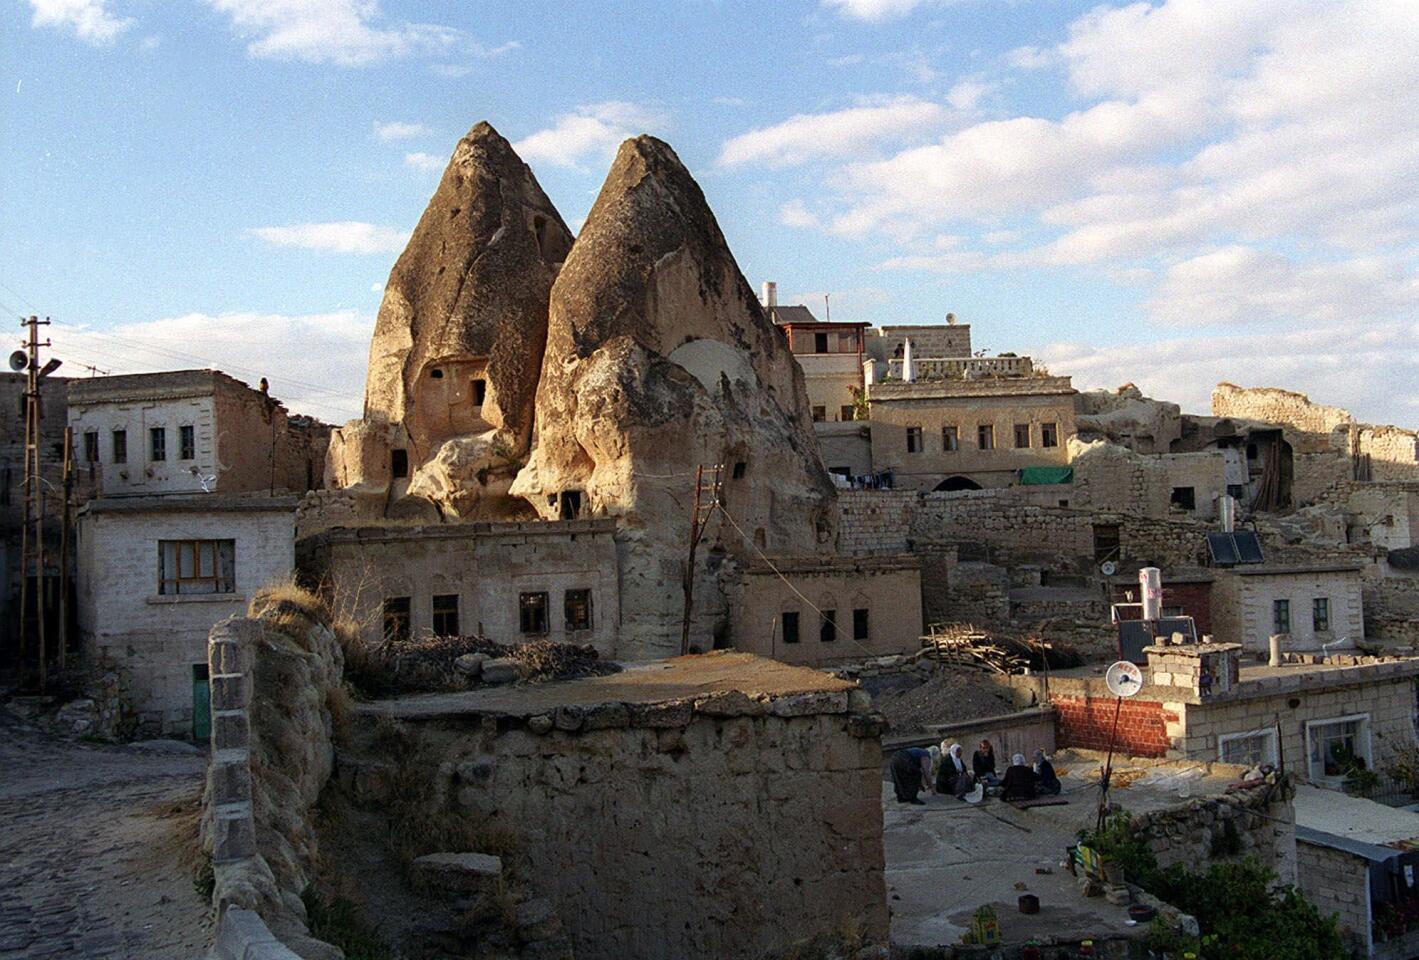 A popular attraction in central Turkey, Cappadocia is known for the fairy-tale-like rock formations that bespeckle the region. Called fairy chimneys, or hoodoos, these formations have been carved by erosion over the millennia.